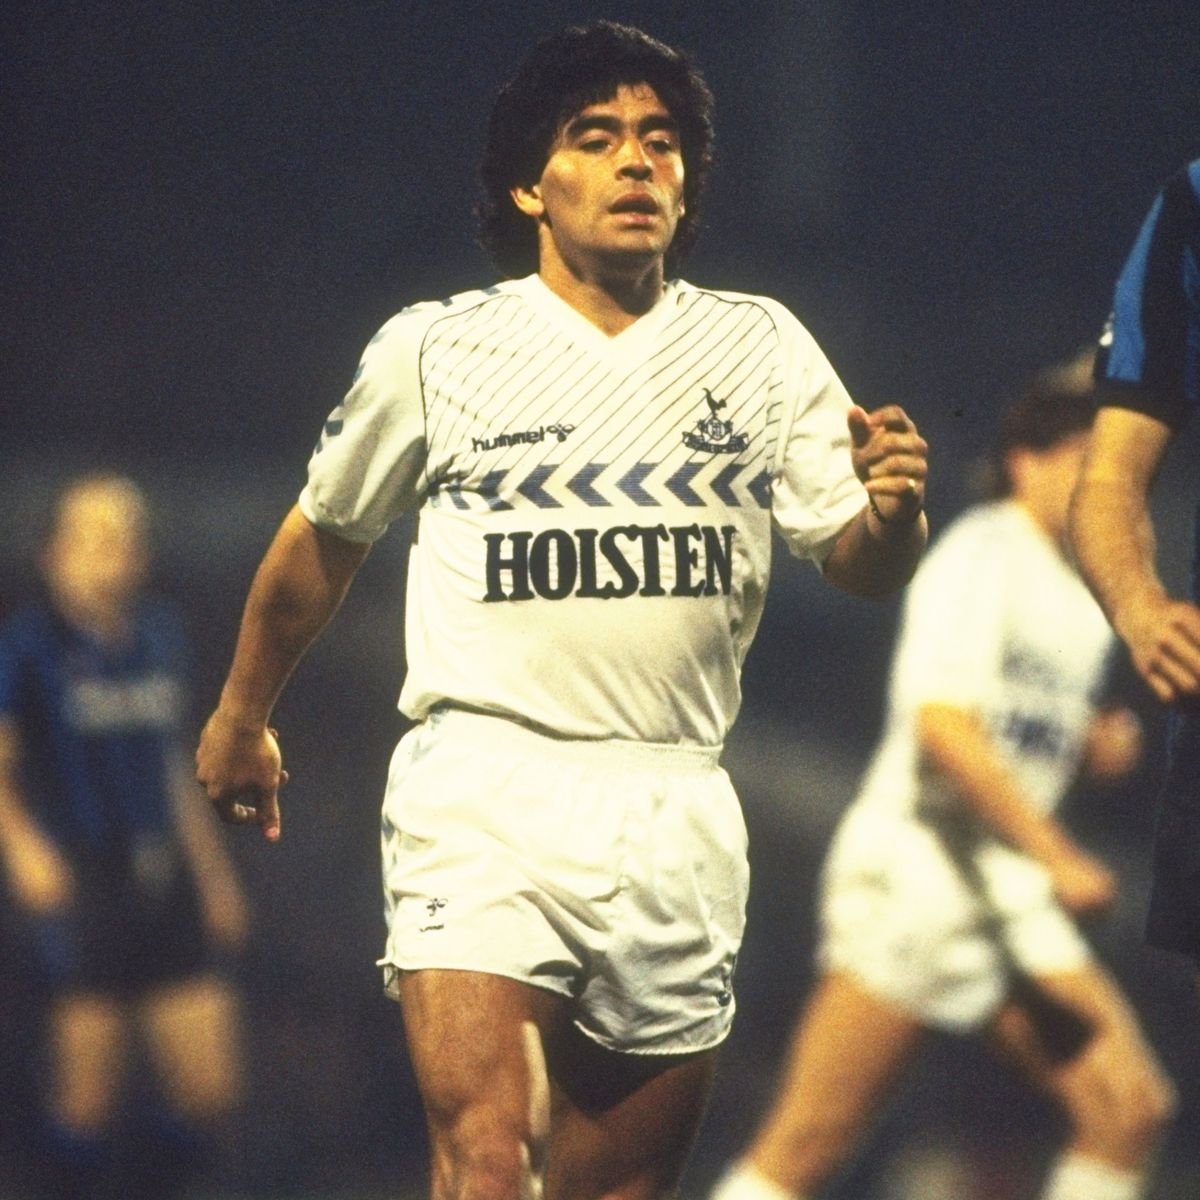 Classic Football Shirts on X: Tottenham Hotspur 1985 Home by Hummel ⚪  Amazing 80s Hummel design worn during Ossie Ardiles' testimonial in 1986.  Diego Maradona even got a run-out in it! Hitting